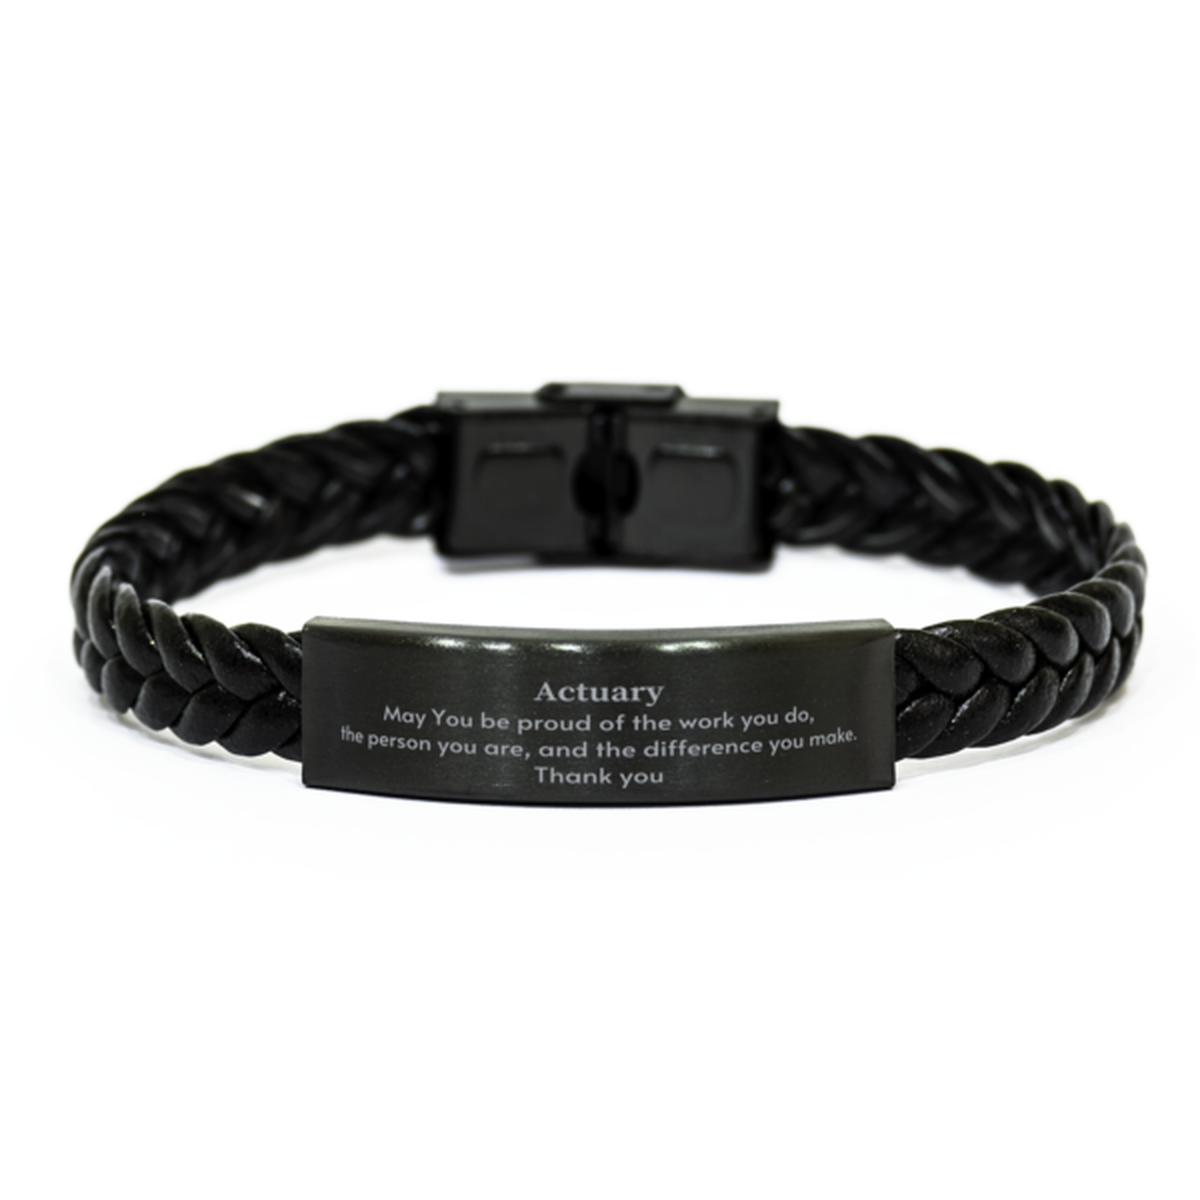 Heartwarming Braided Leather Bracelet Retirement Coworkers Gifts for Actuary, Actuary May You be proud of the work you do, the person you are Gifts for Boss Men Women Friends